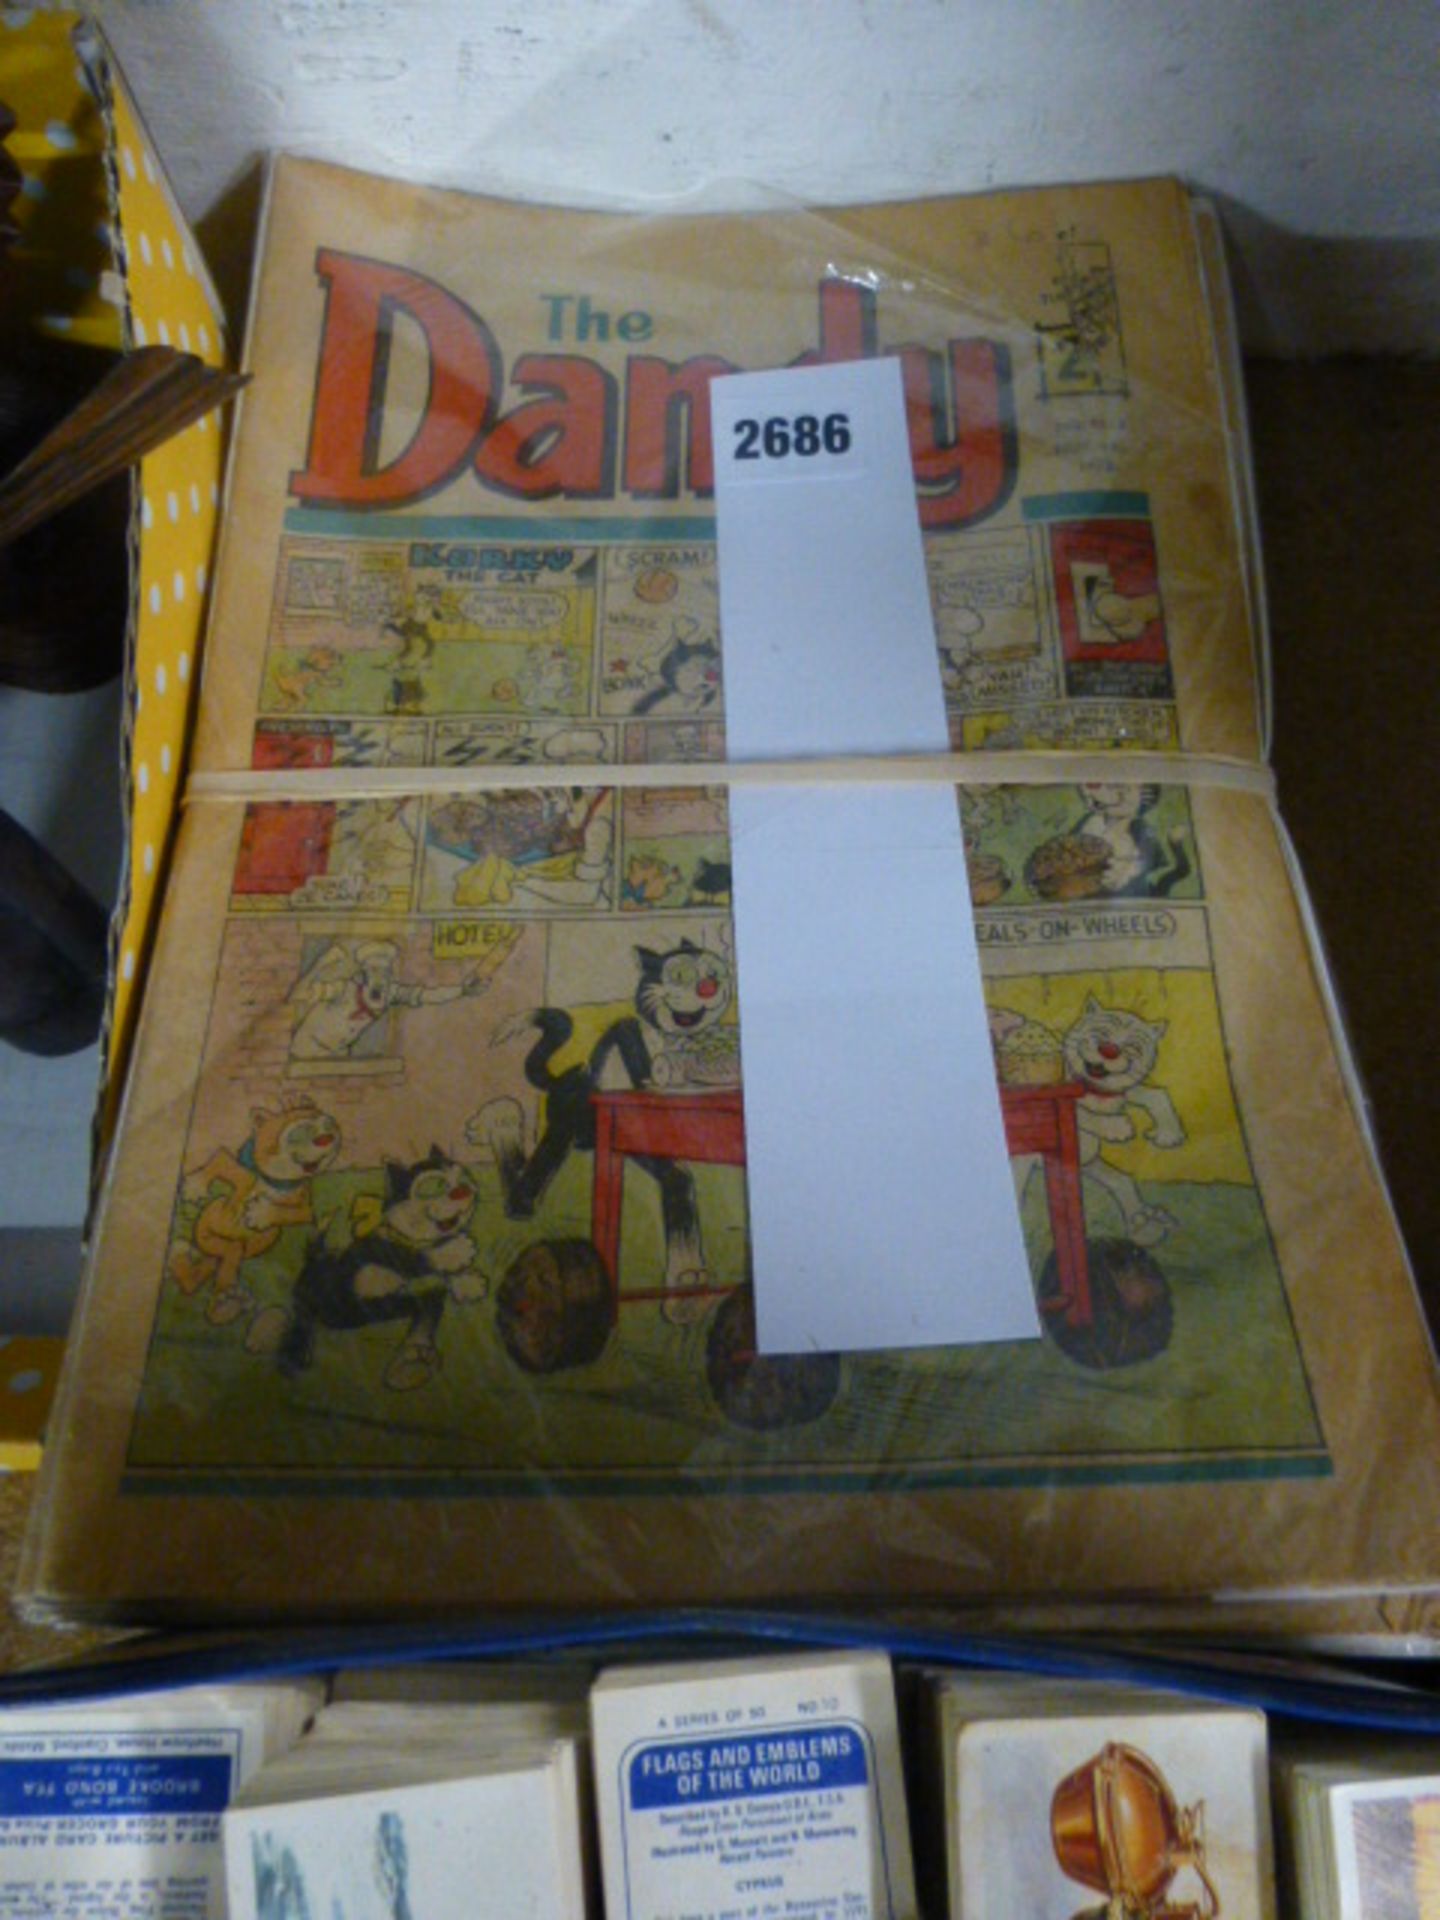 The Beano Comic : 19 issues from 1972/73 and The Dandy Comic : 14 issues from 1972/73.